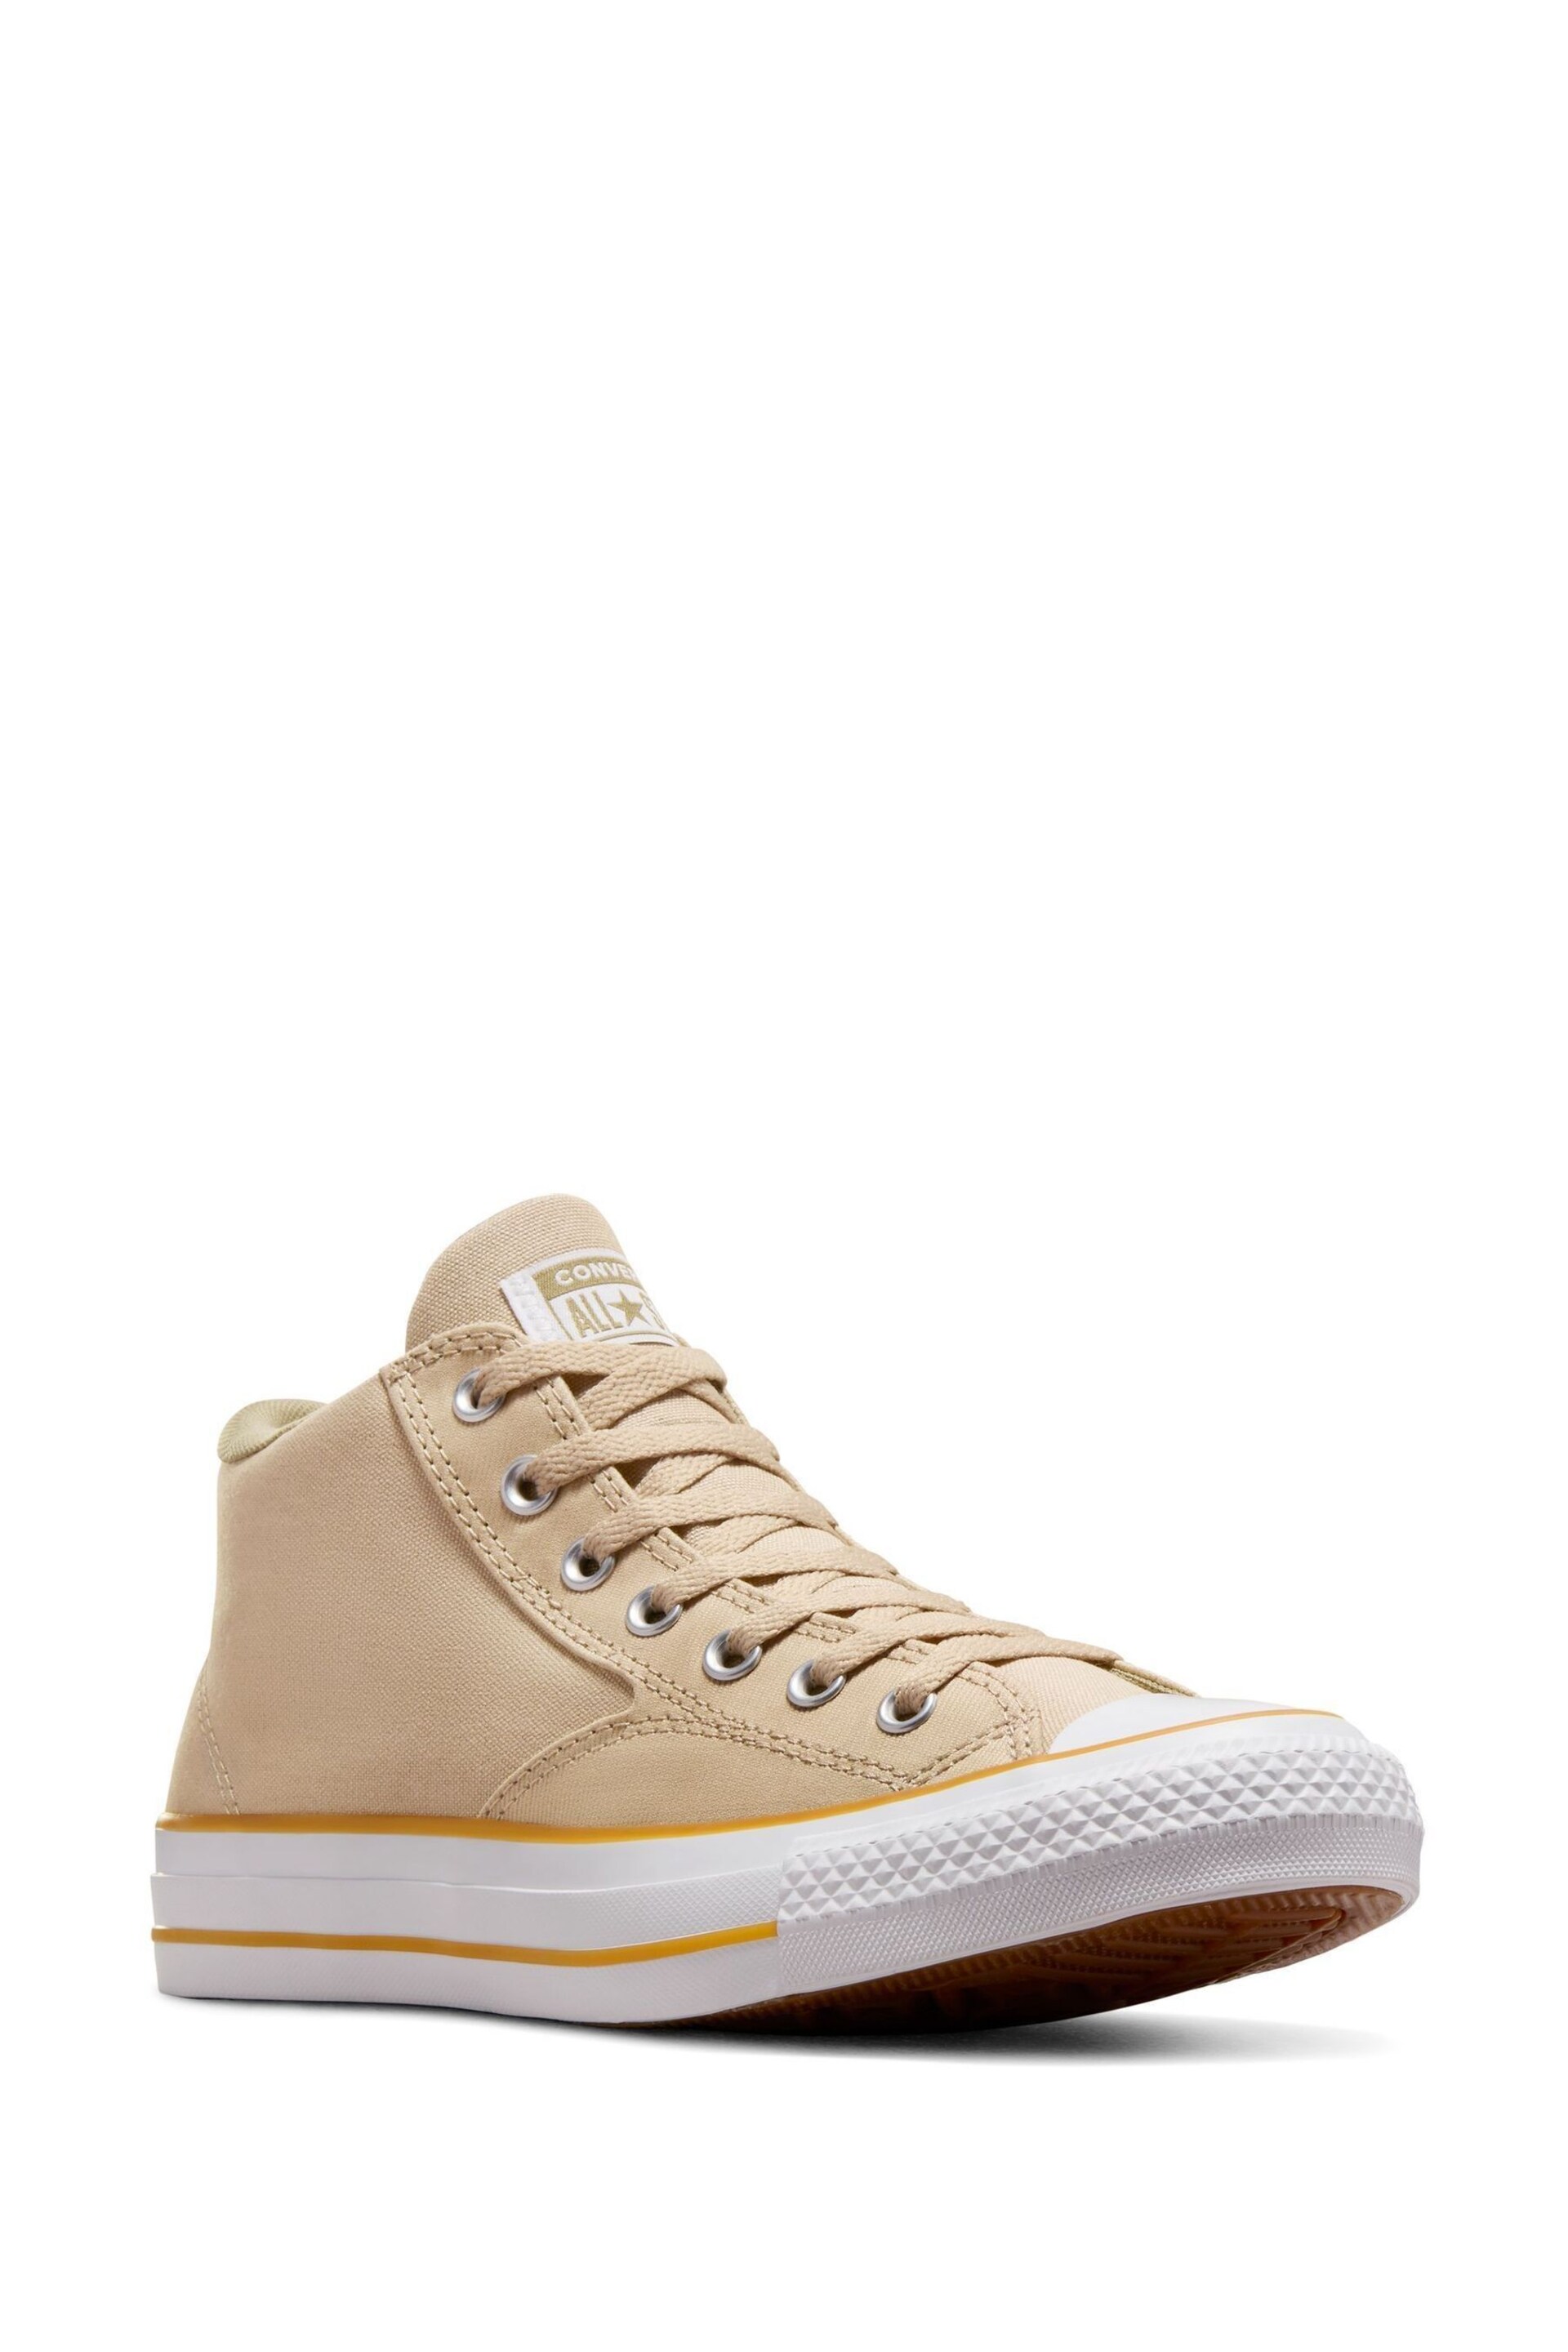 Converse Natural Chuck Taylor All Star Malden Street Trainers - Image 4 of 9